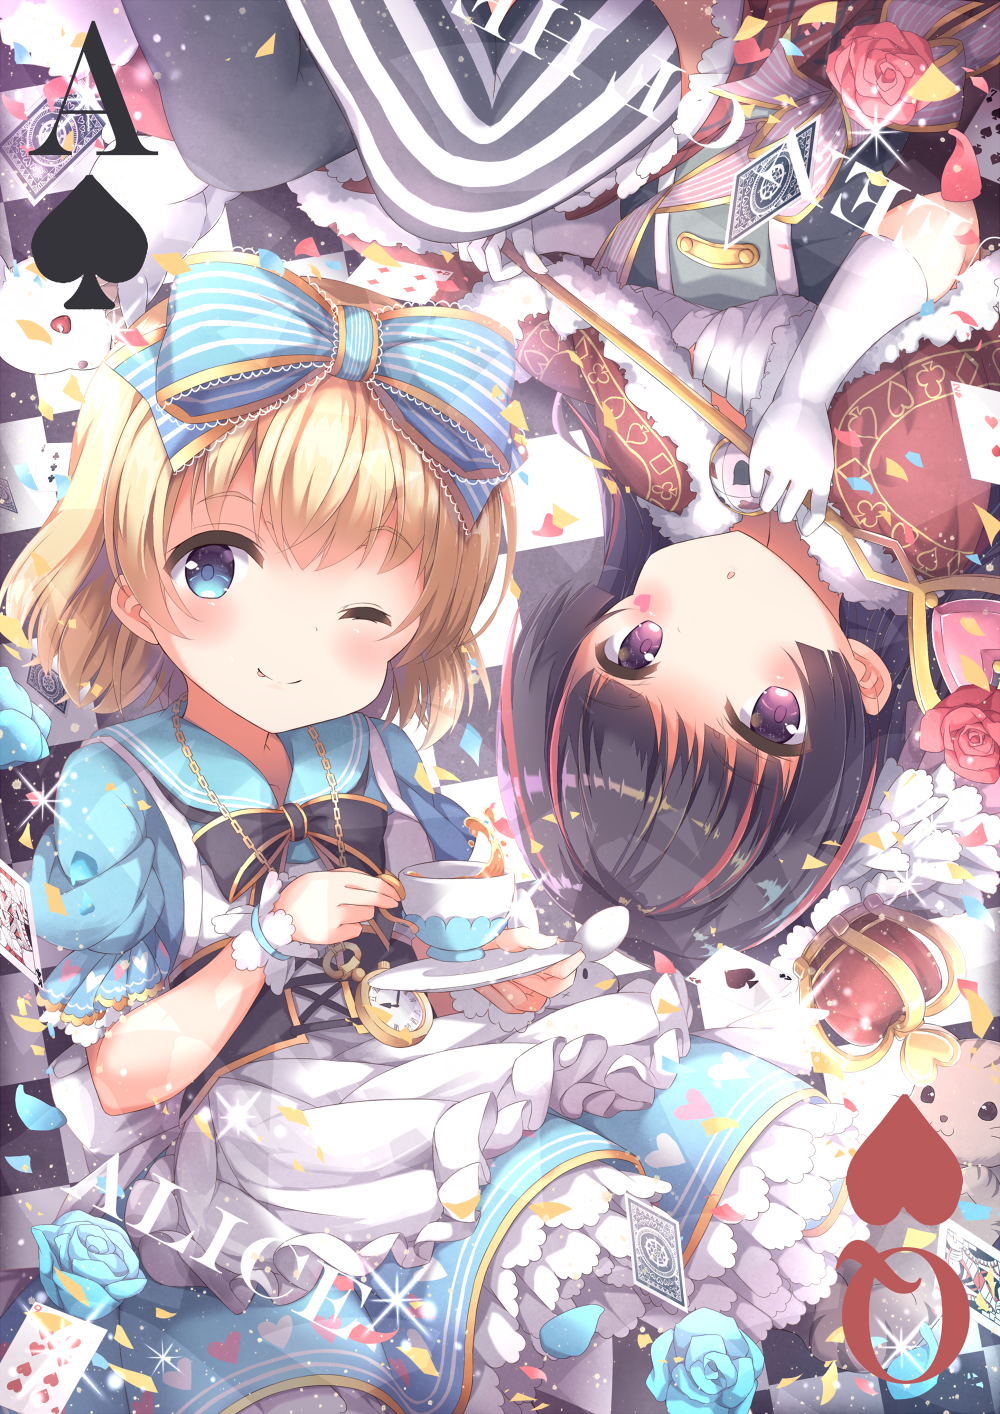 2girls :o ;) alice_(wonderland) alice_in_wonderland apron bangs black_hair black_legwear black_neckwear blonde_hair blue_bow blue_dress blue_eyes blue_flower blue_rose bow bowtie bunny capelet card card_(medium) cat character_name commentary_request corset crown crown_removed cup dress elbow_gloves facial_mark flower frilled_apron frills fur-trimmed_capelet fur_trim gloves hair_bow heart highres holding_scepter looking_at_viewer mismatched_legwear multicolored_hair multiple_girls niwasane_(saneatsu03) one_eye_closed petals pink_flower pink_ribbon pink_rose playing_card pocket_watch purple_eyes queen_of_hearts red_capelet red_hair ribbon rose sailor_dress scepter short_hair short_sleeves smile sparkle streaked_hair striped striped_bow striped_legwear striped_ribbon tea teacup thighhighs vertical-striped_legwear vertical_stripes watch white_apron white_gloves wrist_cuffs